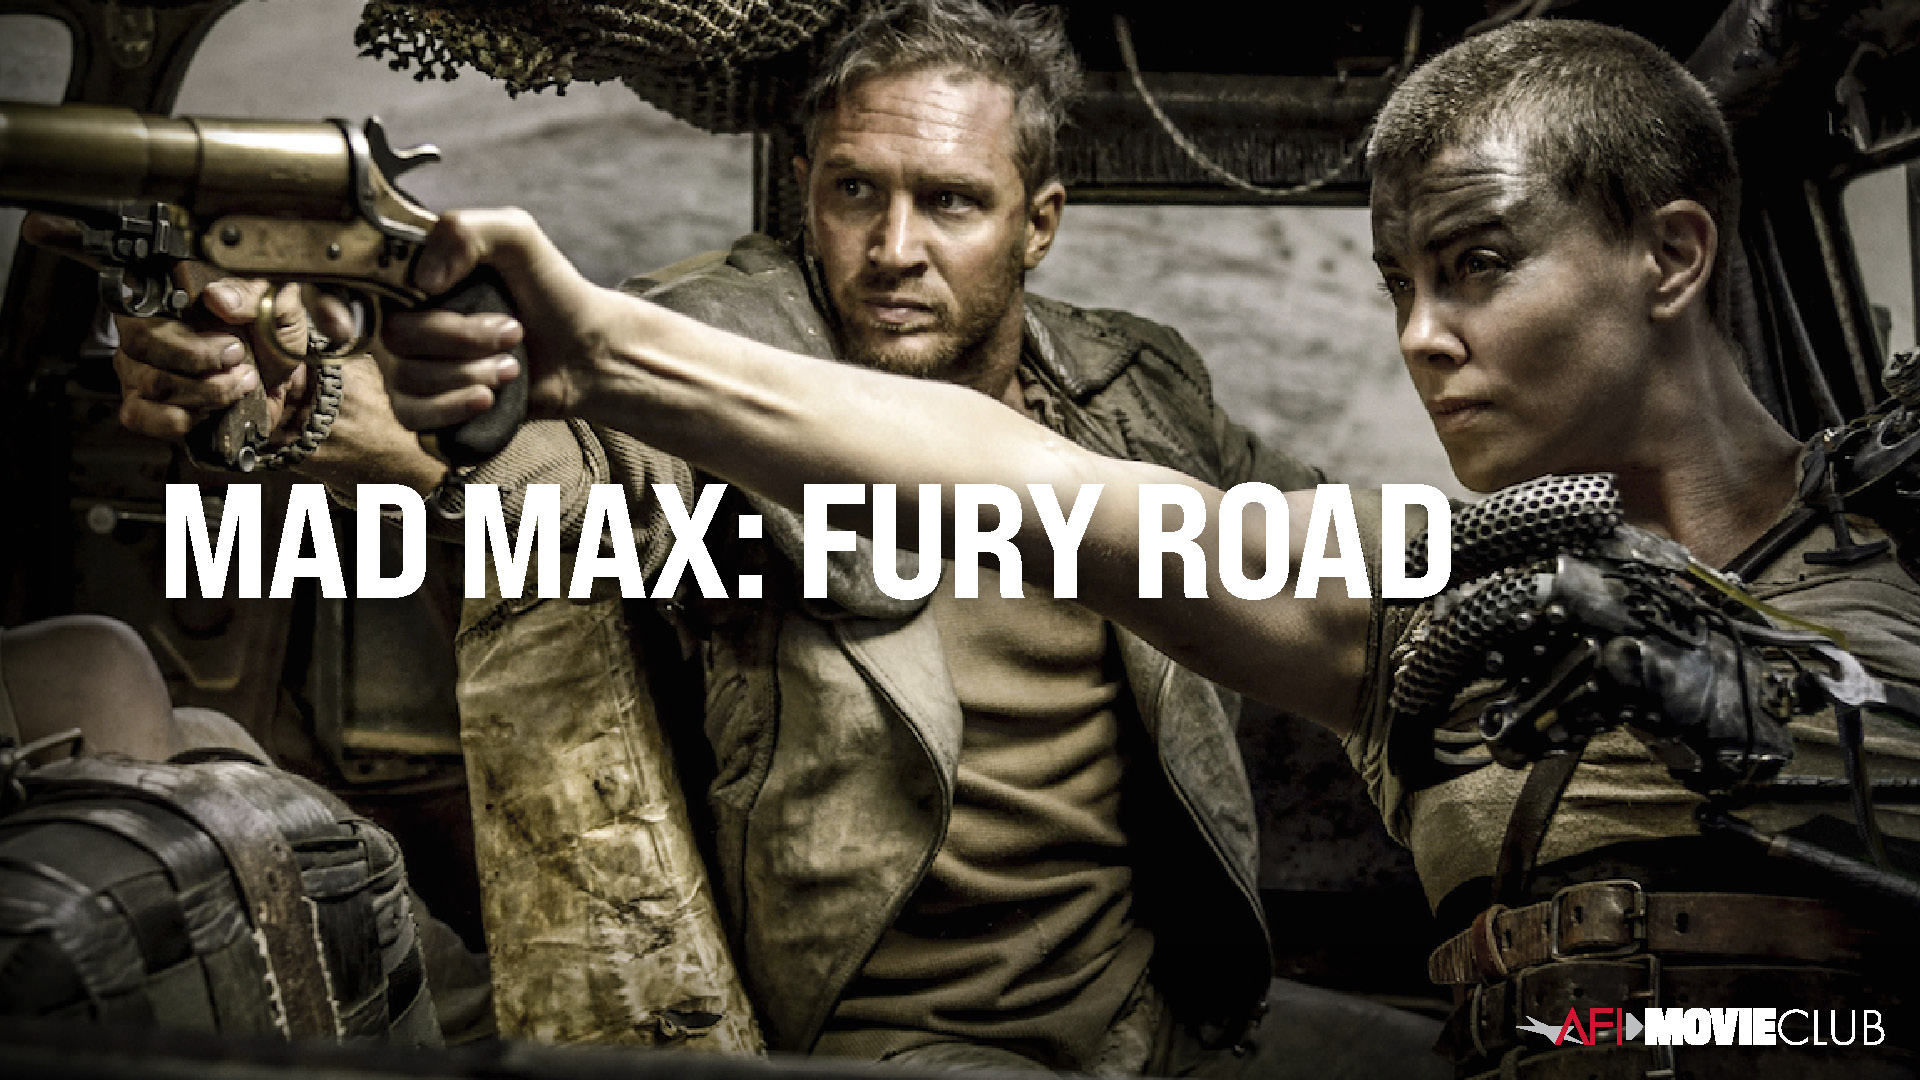 Mad Max: Fury Road Film Still - Charlize Theron and Tom Hardy